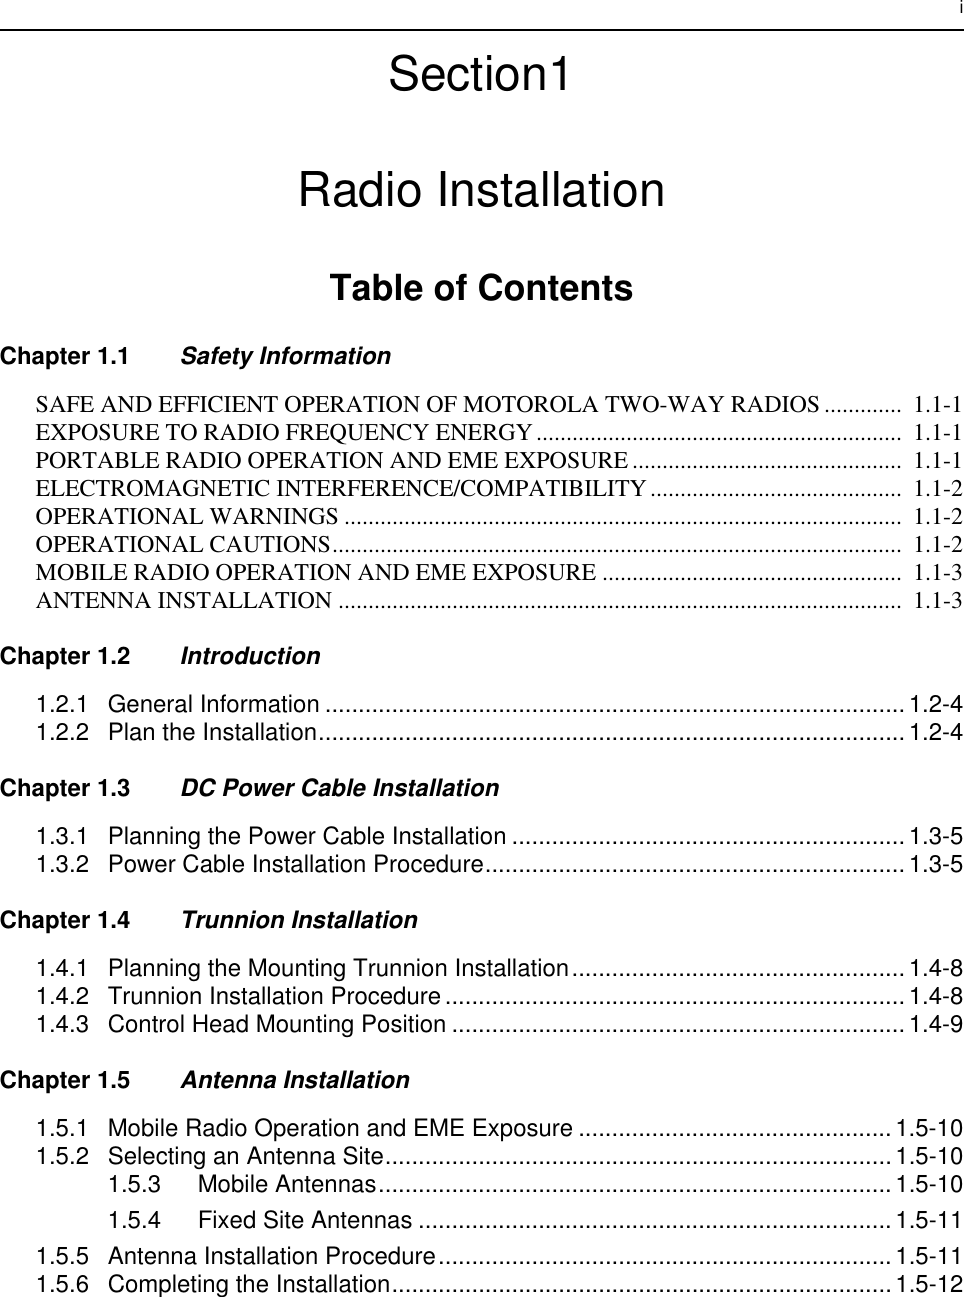  i Section1Radio Installation Table of Contents Chapter 1.1 Safety Information SAFE AND EFFICIENT OPERATION OF MOTOROLA TWO-WAY RADIOS .............  1.1-1EXPOSURE TO RADIO FREQUENCY ENERGY.............................................................  1.1-1PORTABLE RADIO OPERATION AND EME EXPOSURE .............................................  1.1-1ELECTROMAGNETIC INTERFERENCE/COMPATIBILITY..........................................  1.1-2OPERATIONAL WARNINGS .............................................................................................  1.1-2OPERATIONAL CAUTIONS...............................................................................................  1.1-2MOBILE RADIO OPERATION AND EME EXPOSURE ..................................................  1.1-3ANTENNA INSTALLATION ..............................................................................................  1.1-3 Chapter 1.2 Introduction 1.2.1 General Information .......................................................................................1.2-41.2.2 Plan the Installation........................................................................................1.2-4 Chapter 1.3 DC Power Cable Installation 1.3.1 Planning the Power Cable Installation ...........................................................1.3-51.3.2 Power Cable Installation Procedure...............................................................1.3-5 Chapter 1.4 Trunnion Installation 1.4.1 Planning the Mounting Trunnion Installation..................................................1.4-81.4.2 Trunnion Installation Procedure.....................................................................1.4-81.4.3 Control Head Mounting Position ....................................................................1.4-9 Chapter 1.5 Antenna Installation 1.5.1 Mobile Radio Operation and EME Exposure ...............................................1.5-101.5.2 Selecting an Antenna Site............................................................................1.5-101.5.3 Mobile Antennas.............................................................................1.5-101.5.4 Fixed Site Antennas .......................................................................1.5-111.5.5 Antenna Installation Procedure....................................................................1.5-111.5.6 Completing the Installation...........................................................................1.5-12